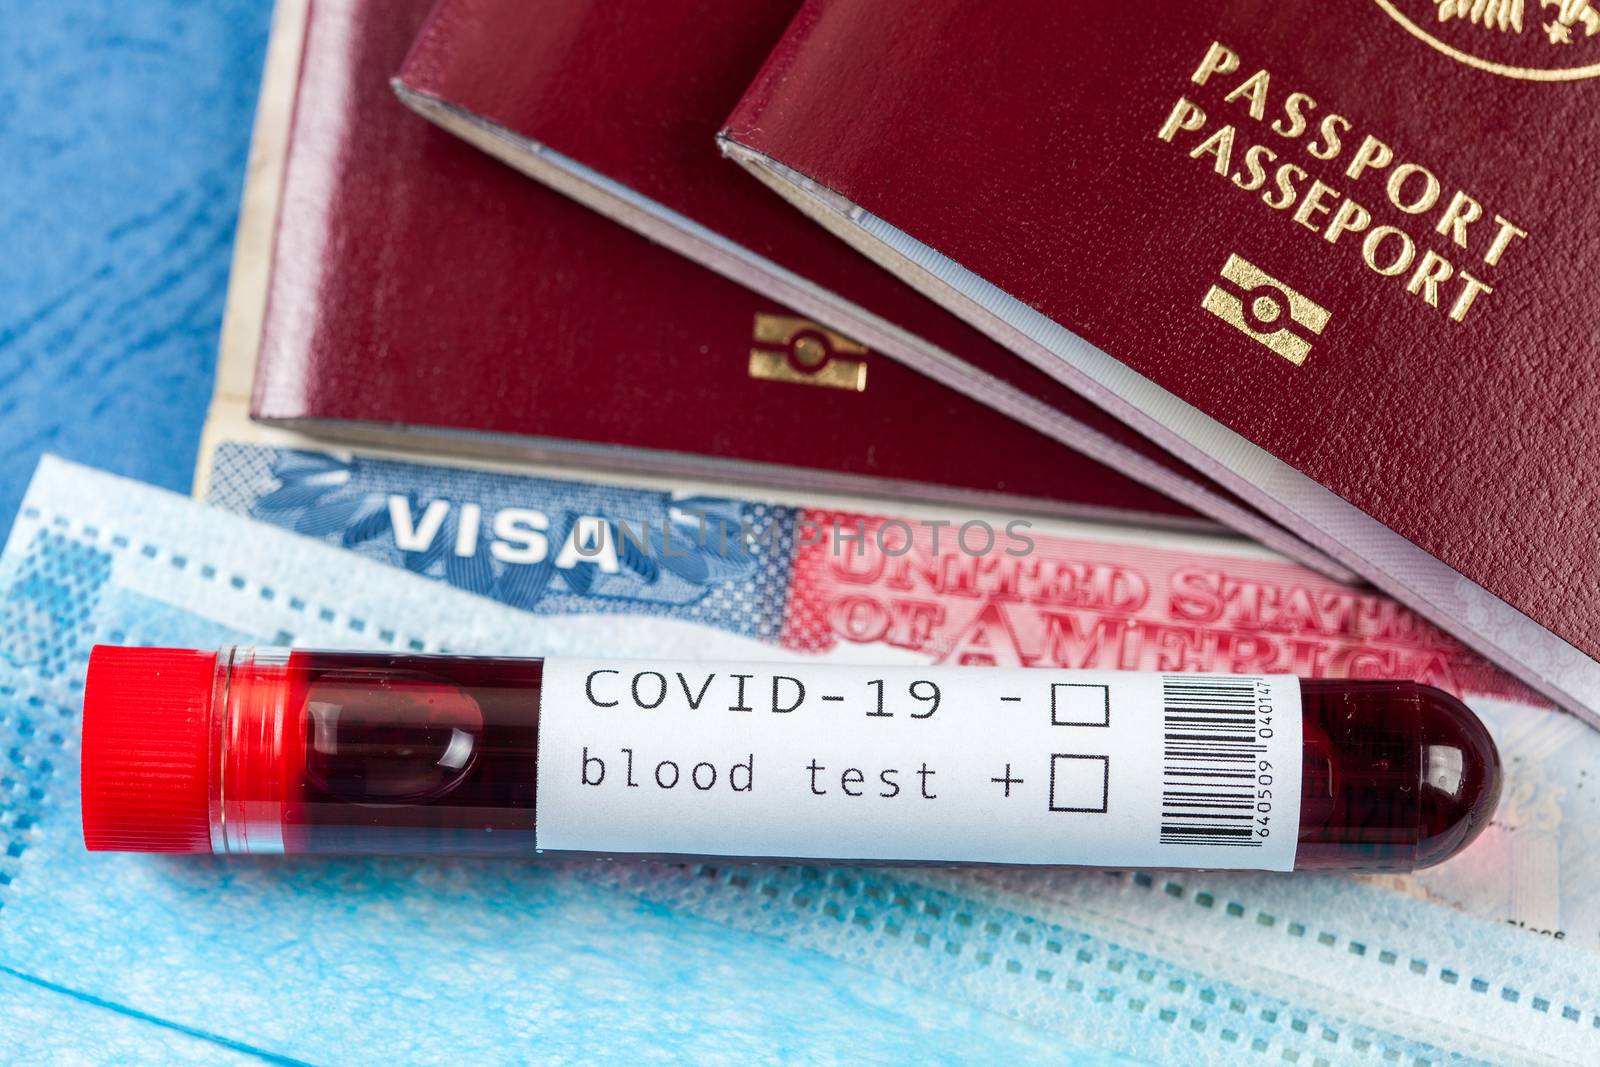 COVID-19 Coronavirus disease, global pandemic outbreak, deadly Wuhan SARS-CoV-2 epidemic, blood sample test tube and several passports with USA American visa, closed borders and cancelled flights